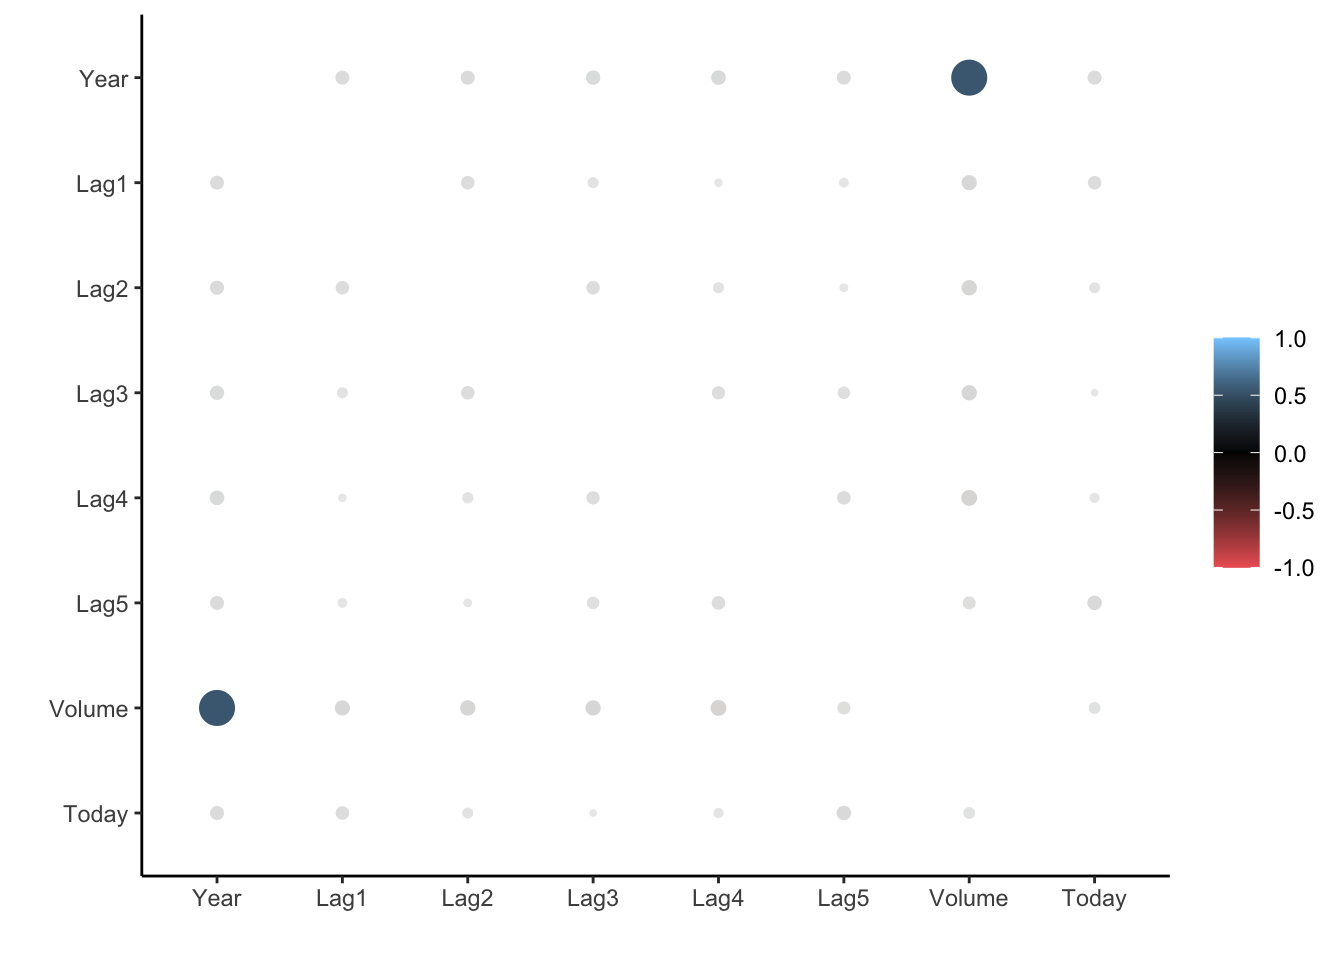 Correlation chart. Most values are very close to 0. Year and Volume appear quite correlated.